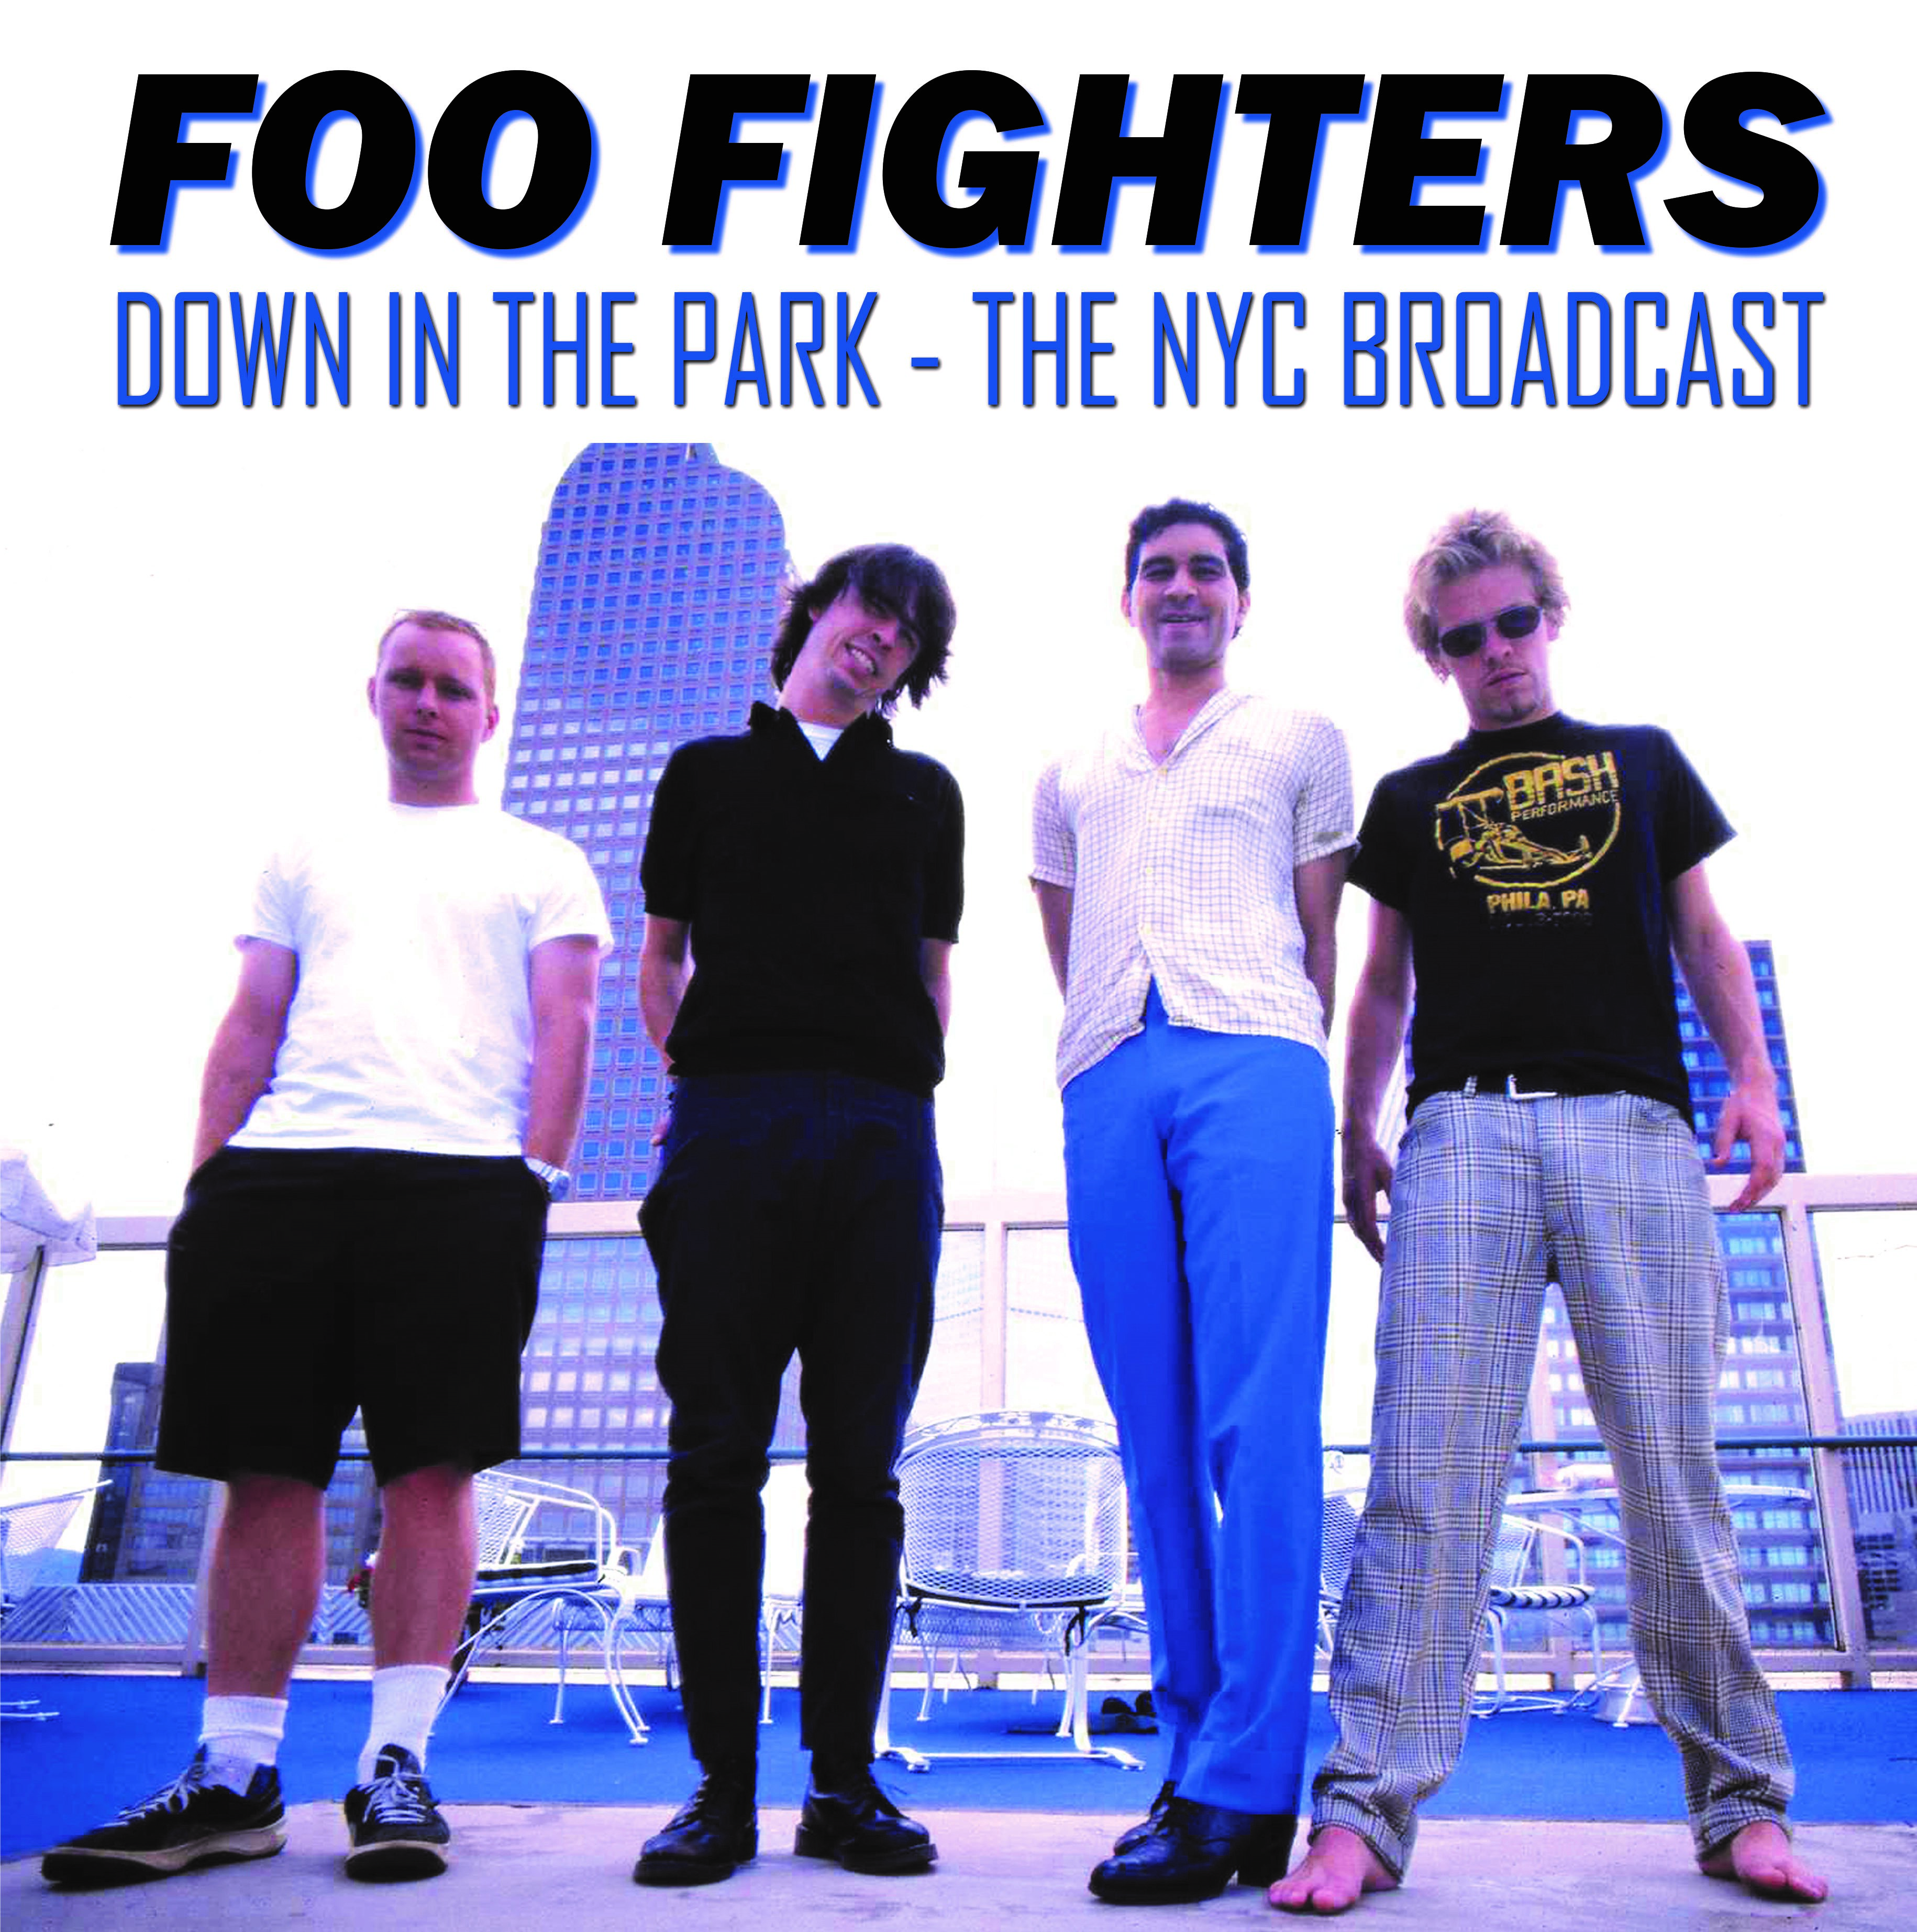 DOWN IN THE PARK - THE NYC BROADCAST